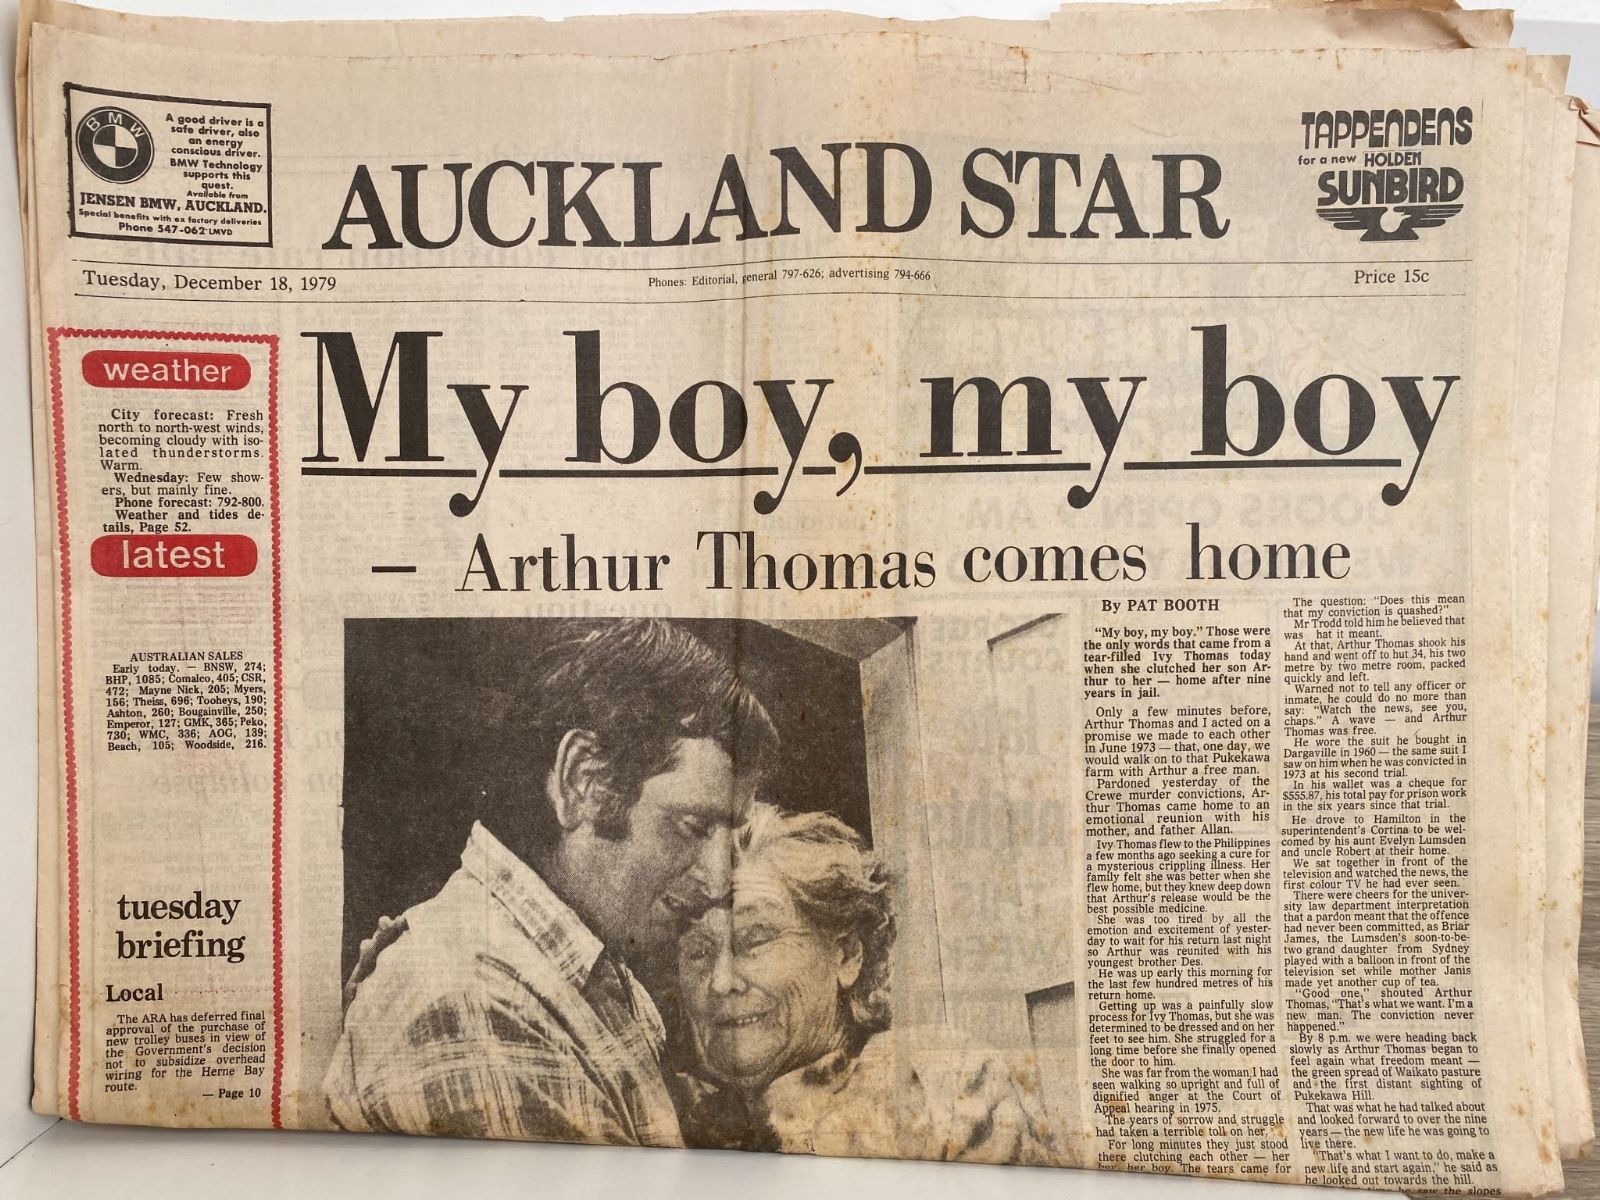 OLD NEWSPAPER: The Auckland Star, 18th December 1979 - Arthur Thomas released